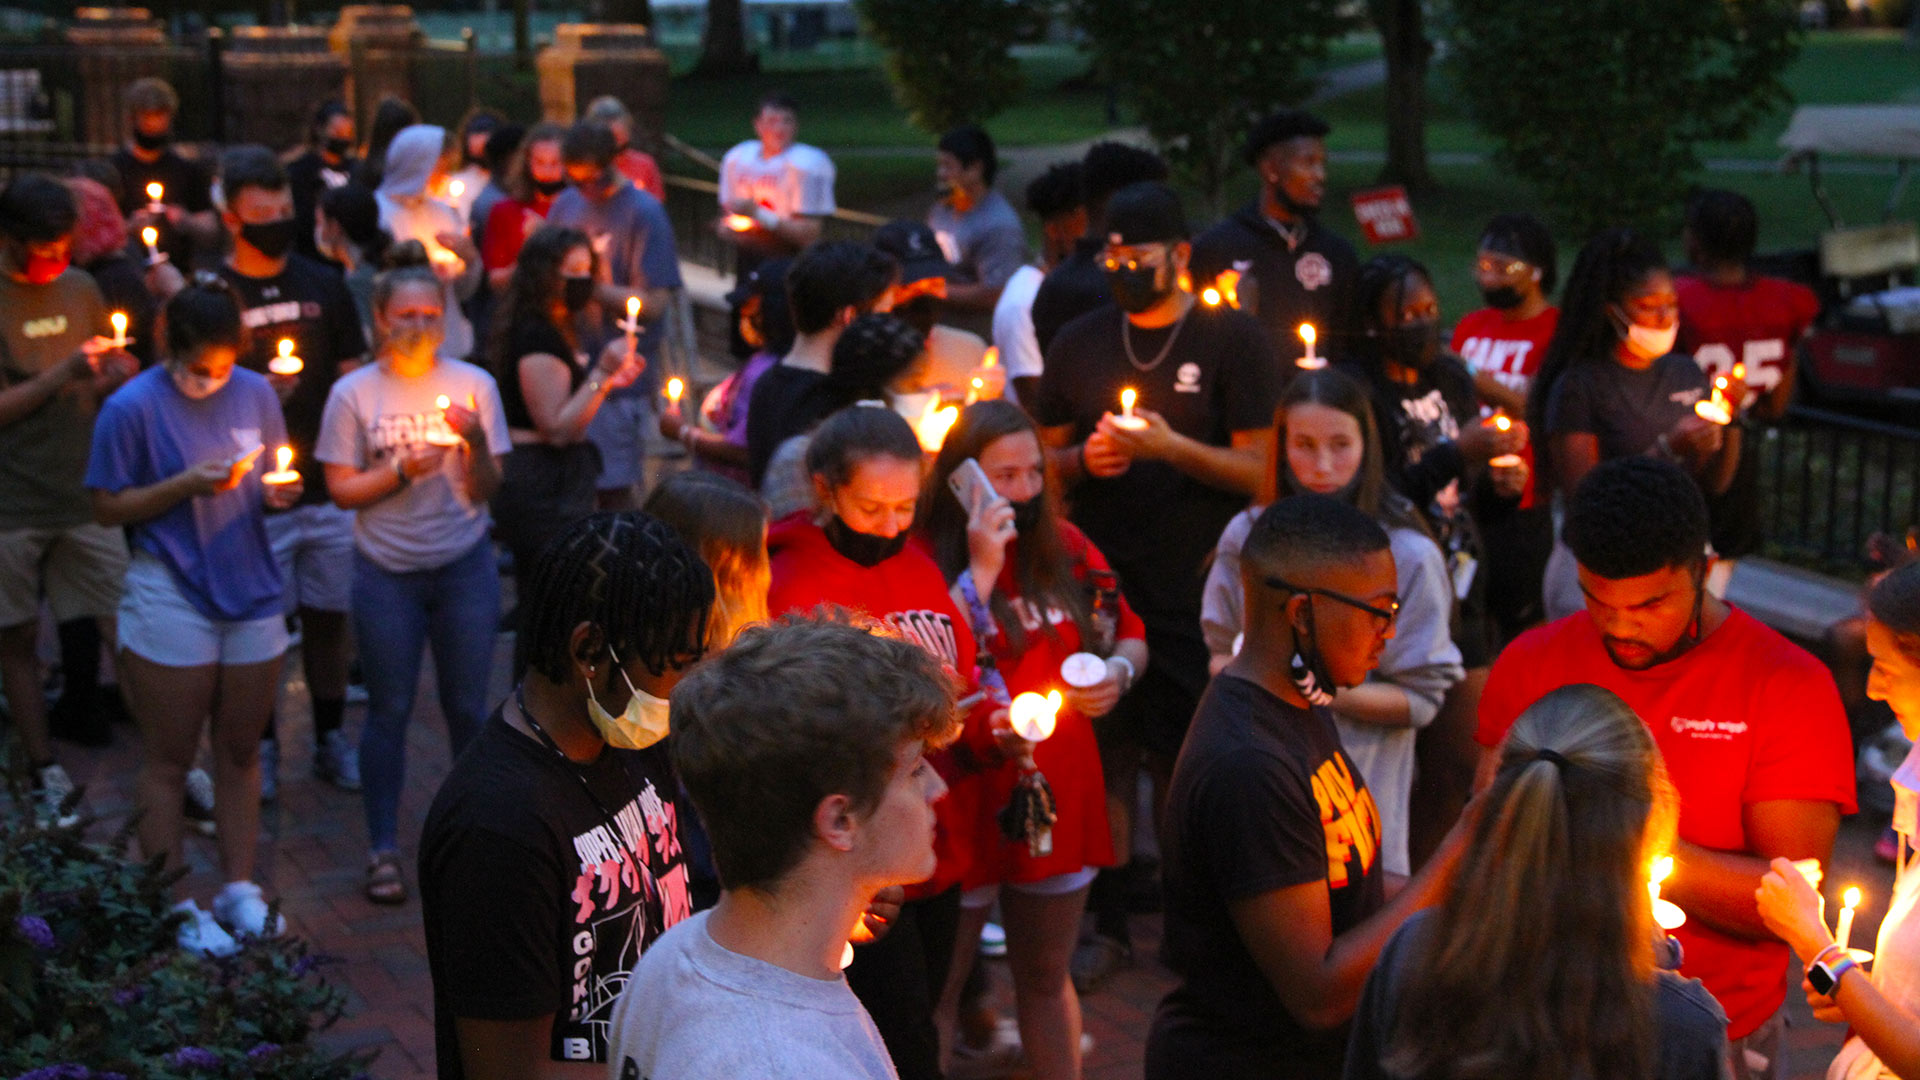 Founders Patio is filled at dusk with a large group of students, all holding their lighted candles at the ceremony.